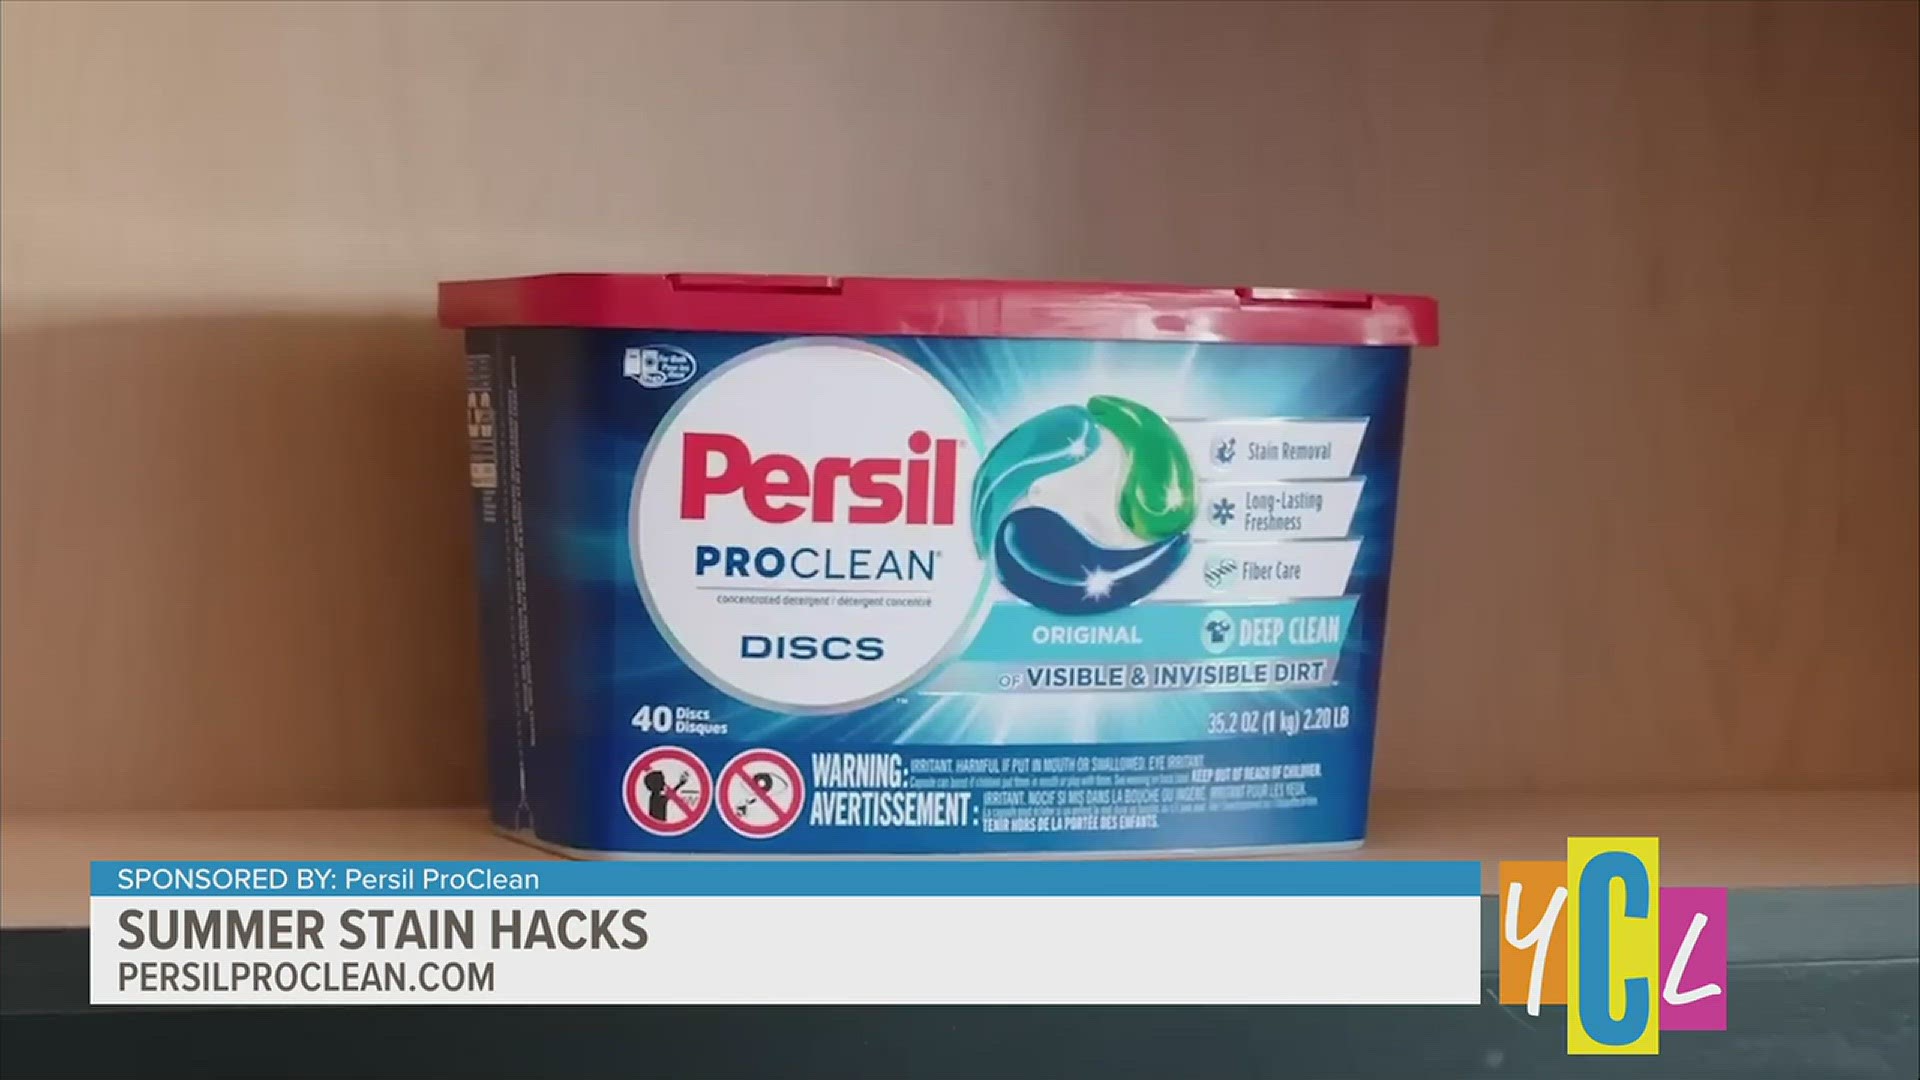 A scientist shares some timely stain removal tips just in time for summer! Learn how to clean stains and odors. This segment is paid by Persil ProClean.